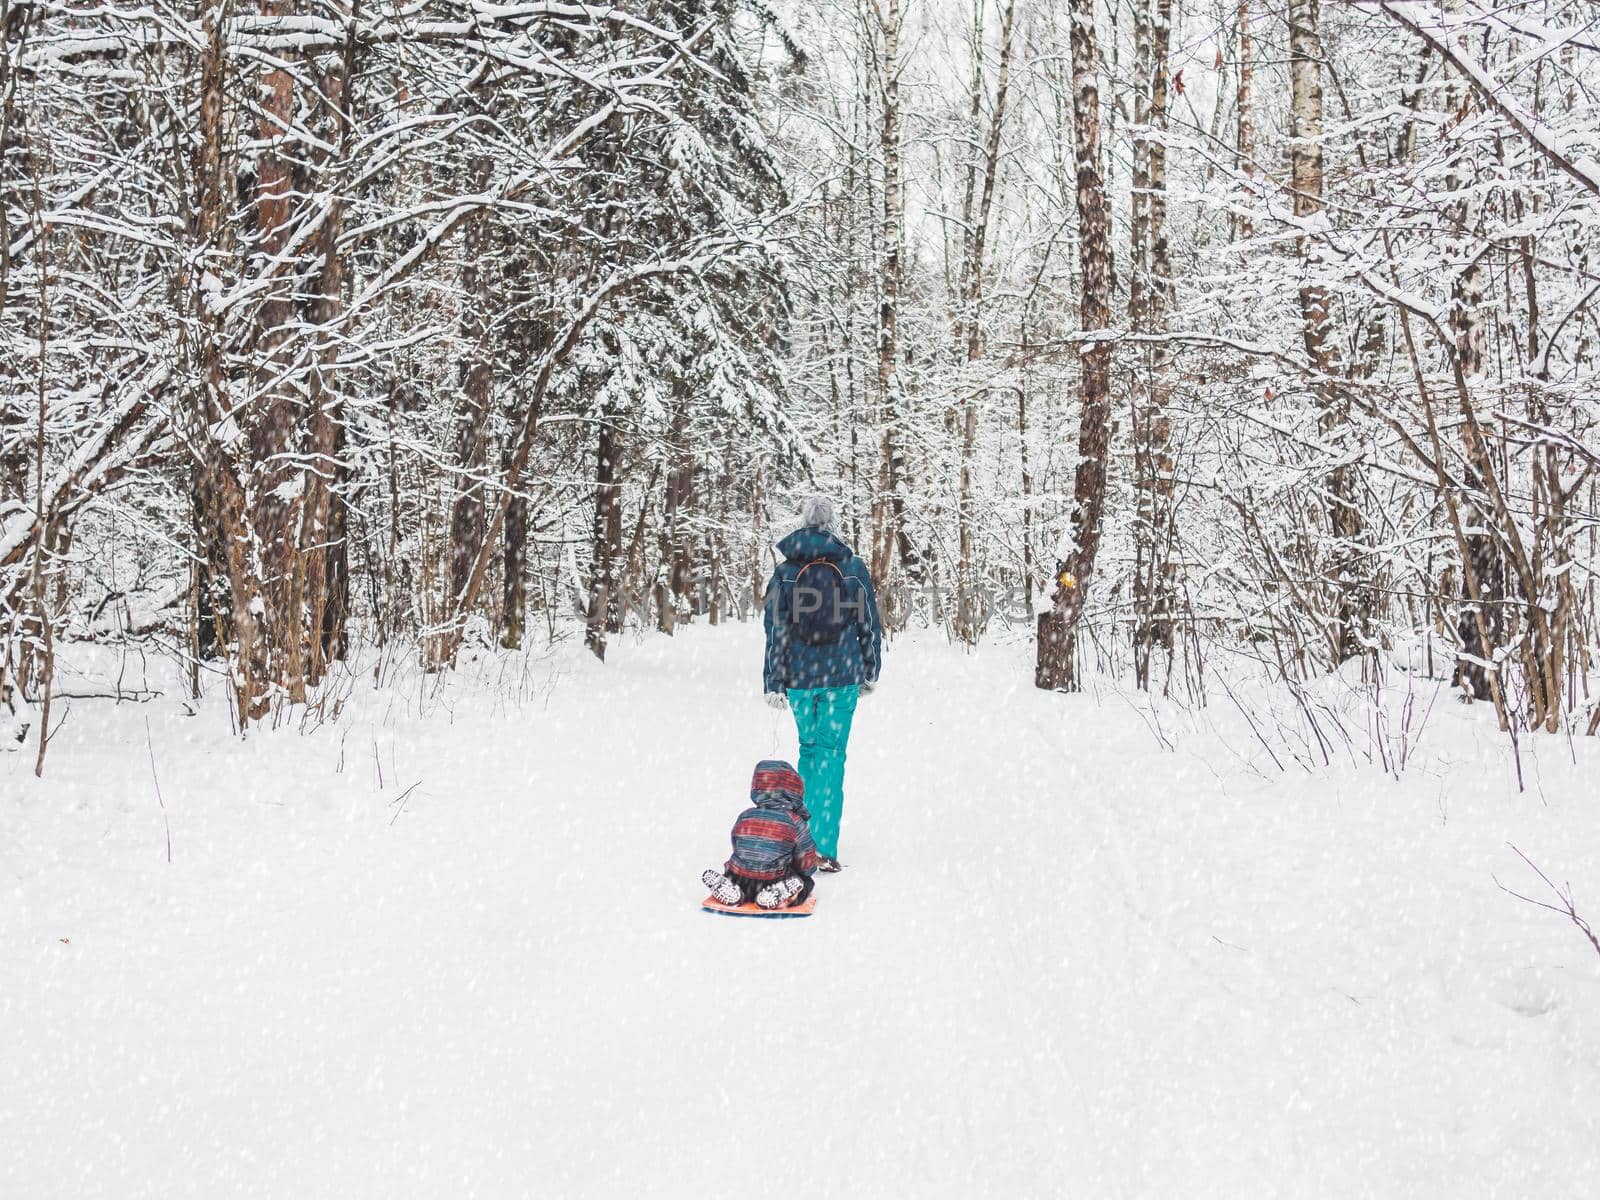 Woman carries child on sledge along path in winter forest. Outdoor leisure activity in cold snowy season. by aksenovko